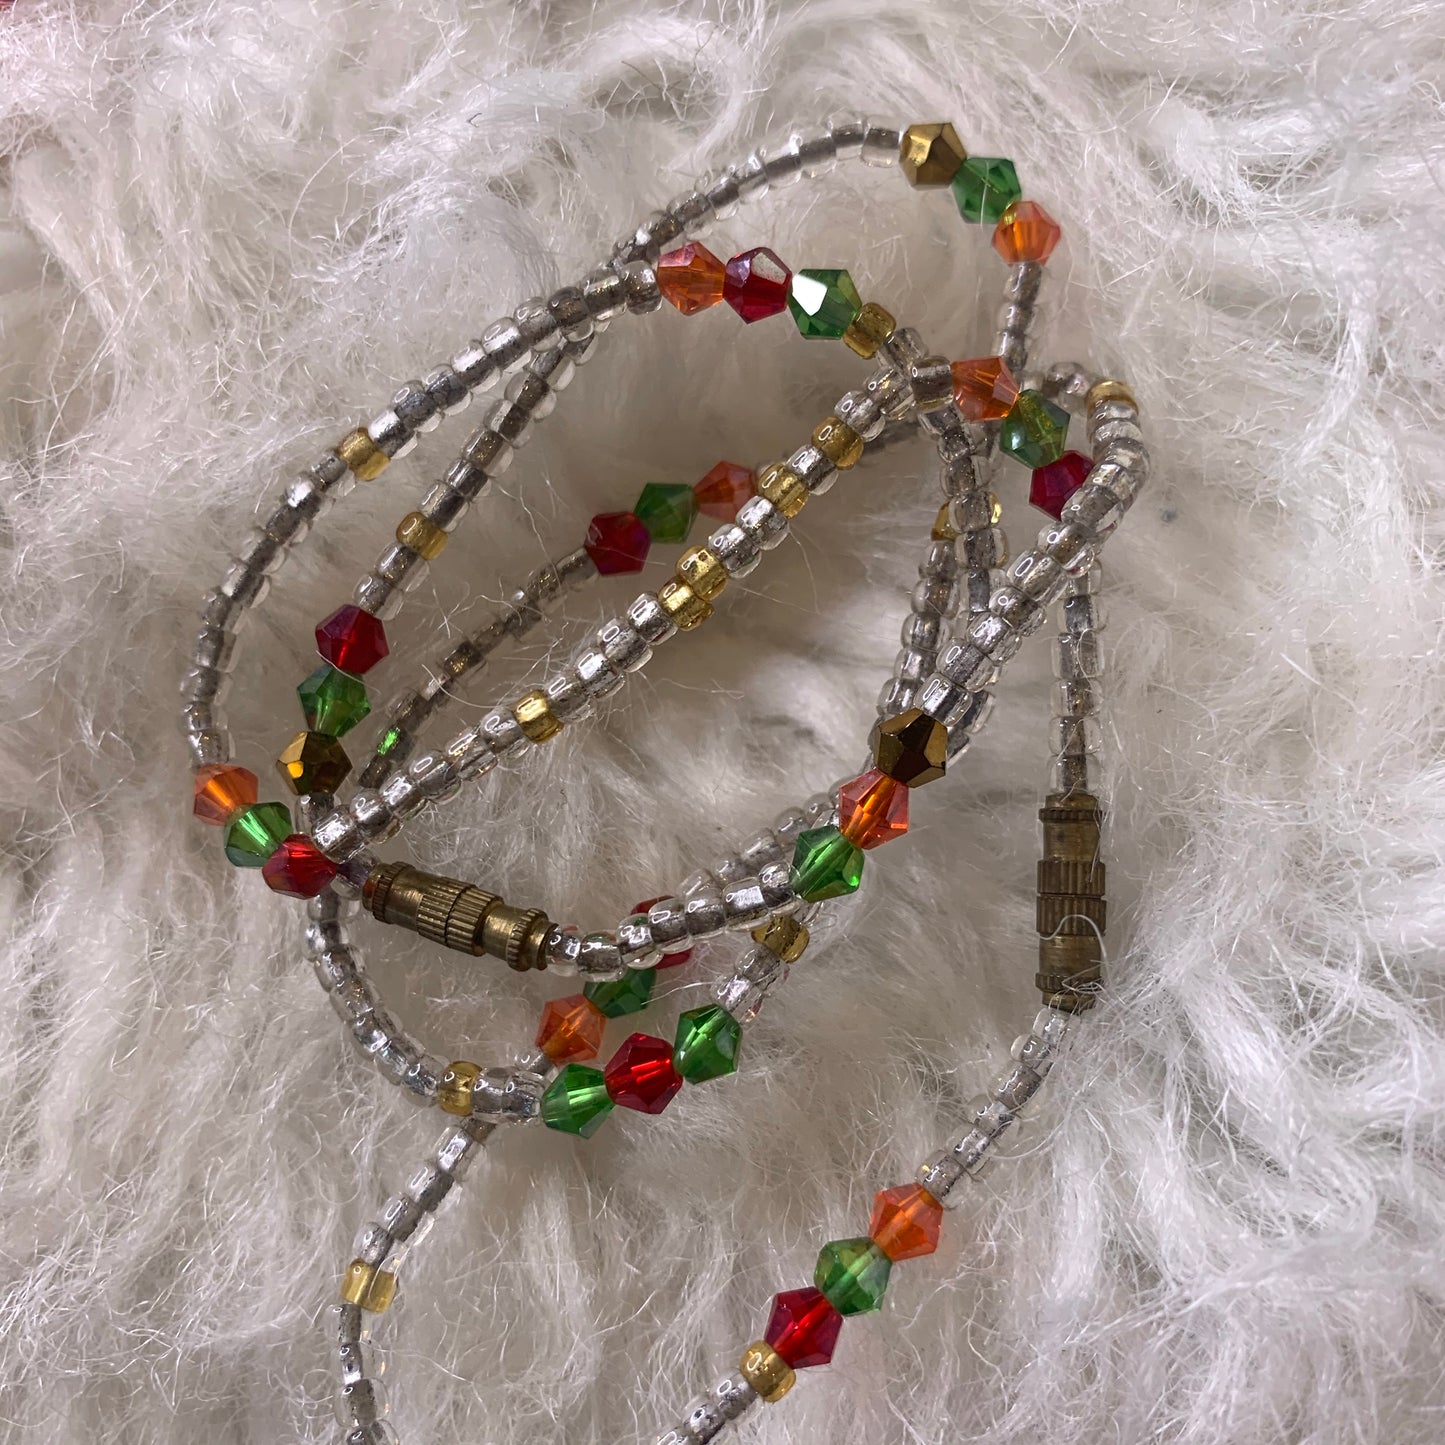 9 Inches Silver And Gold Glass Beads With Red, Orange, blue And Green Pebble Bar Removable Screws Anklet